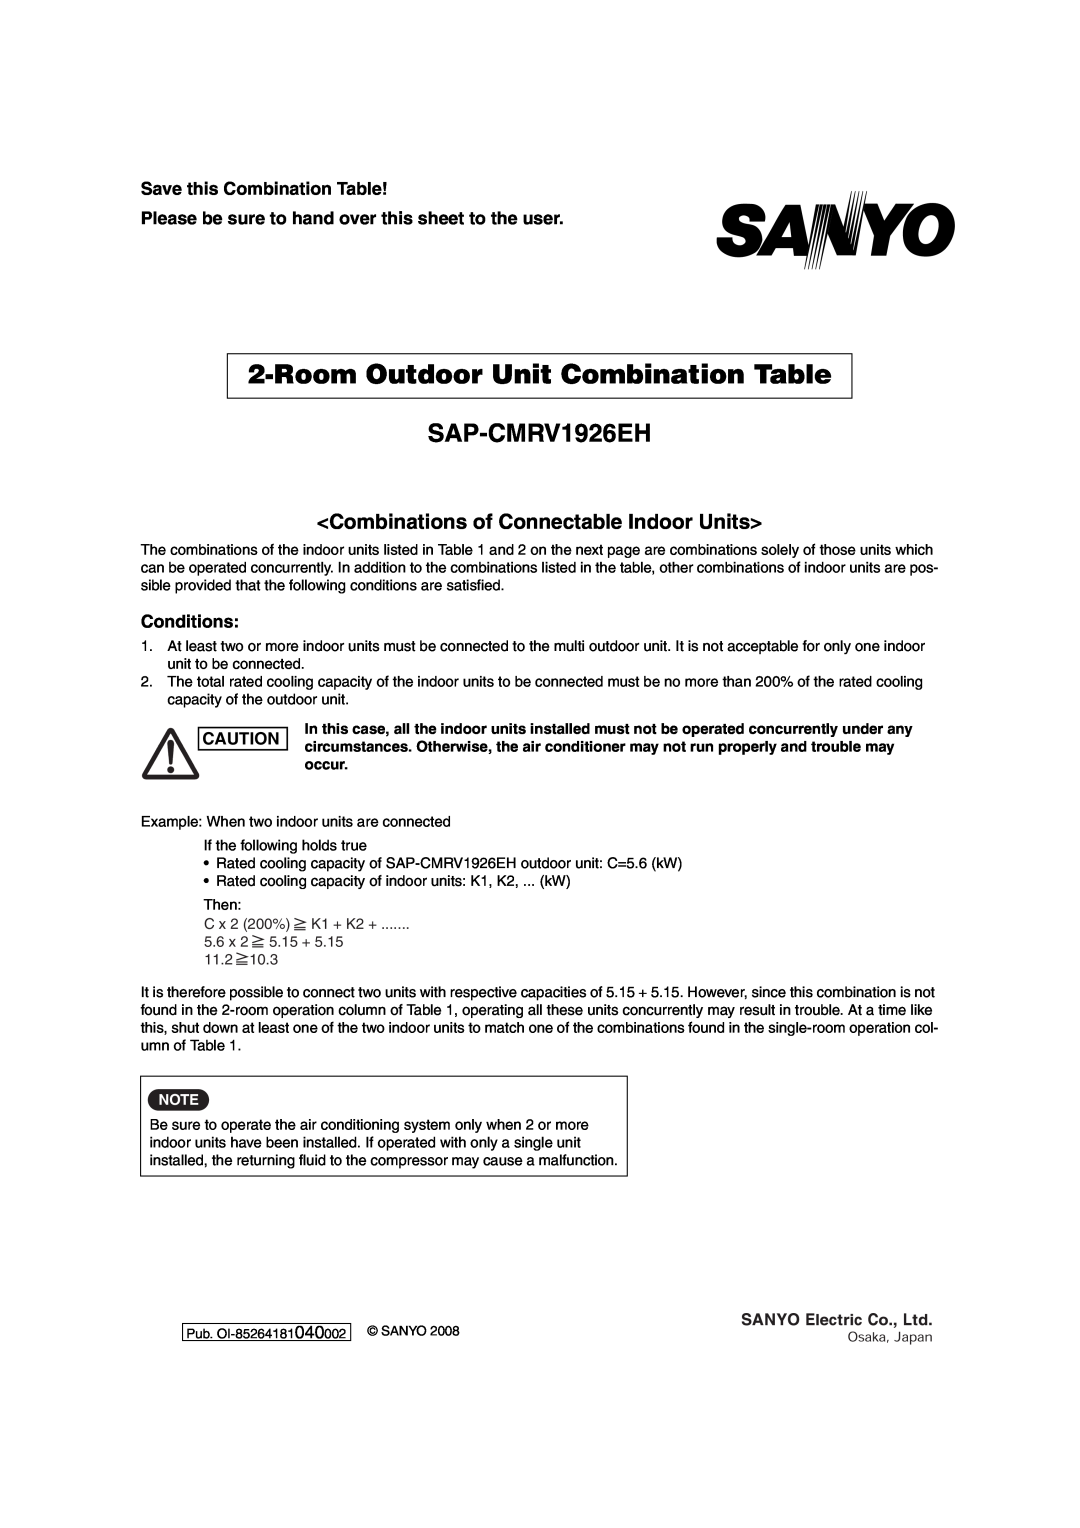 Sanyo SAP-CMRV1426EH-F SAP-CMRV1926EH, RoomOutdoor Unit Combination Table, <Combinations of Connectable Indoor Units> 